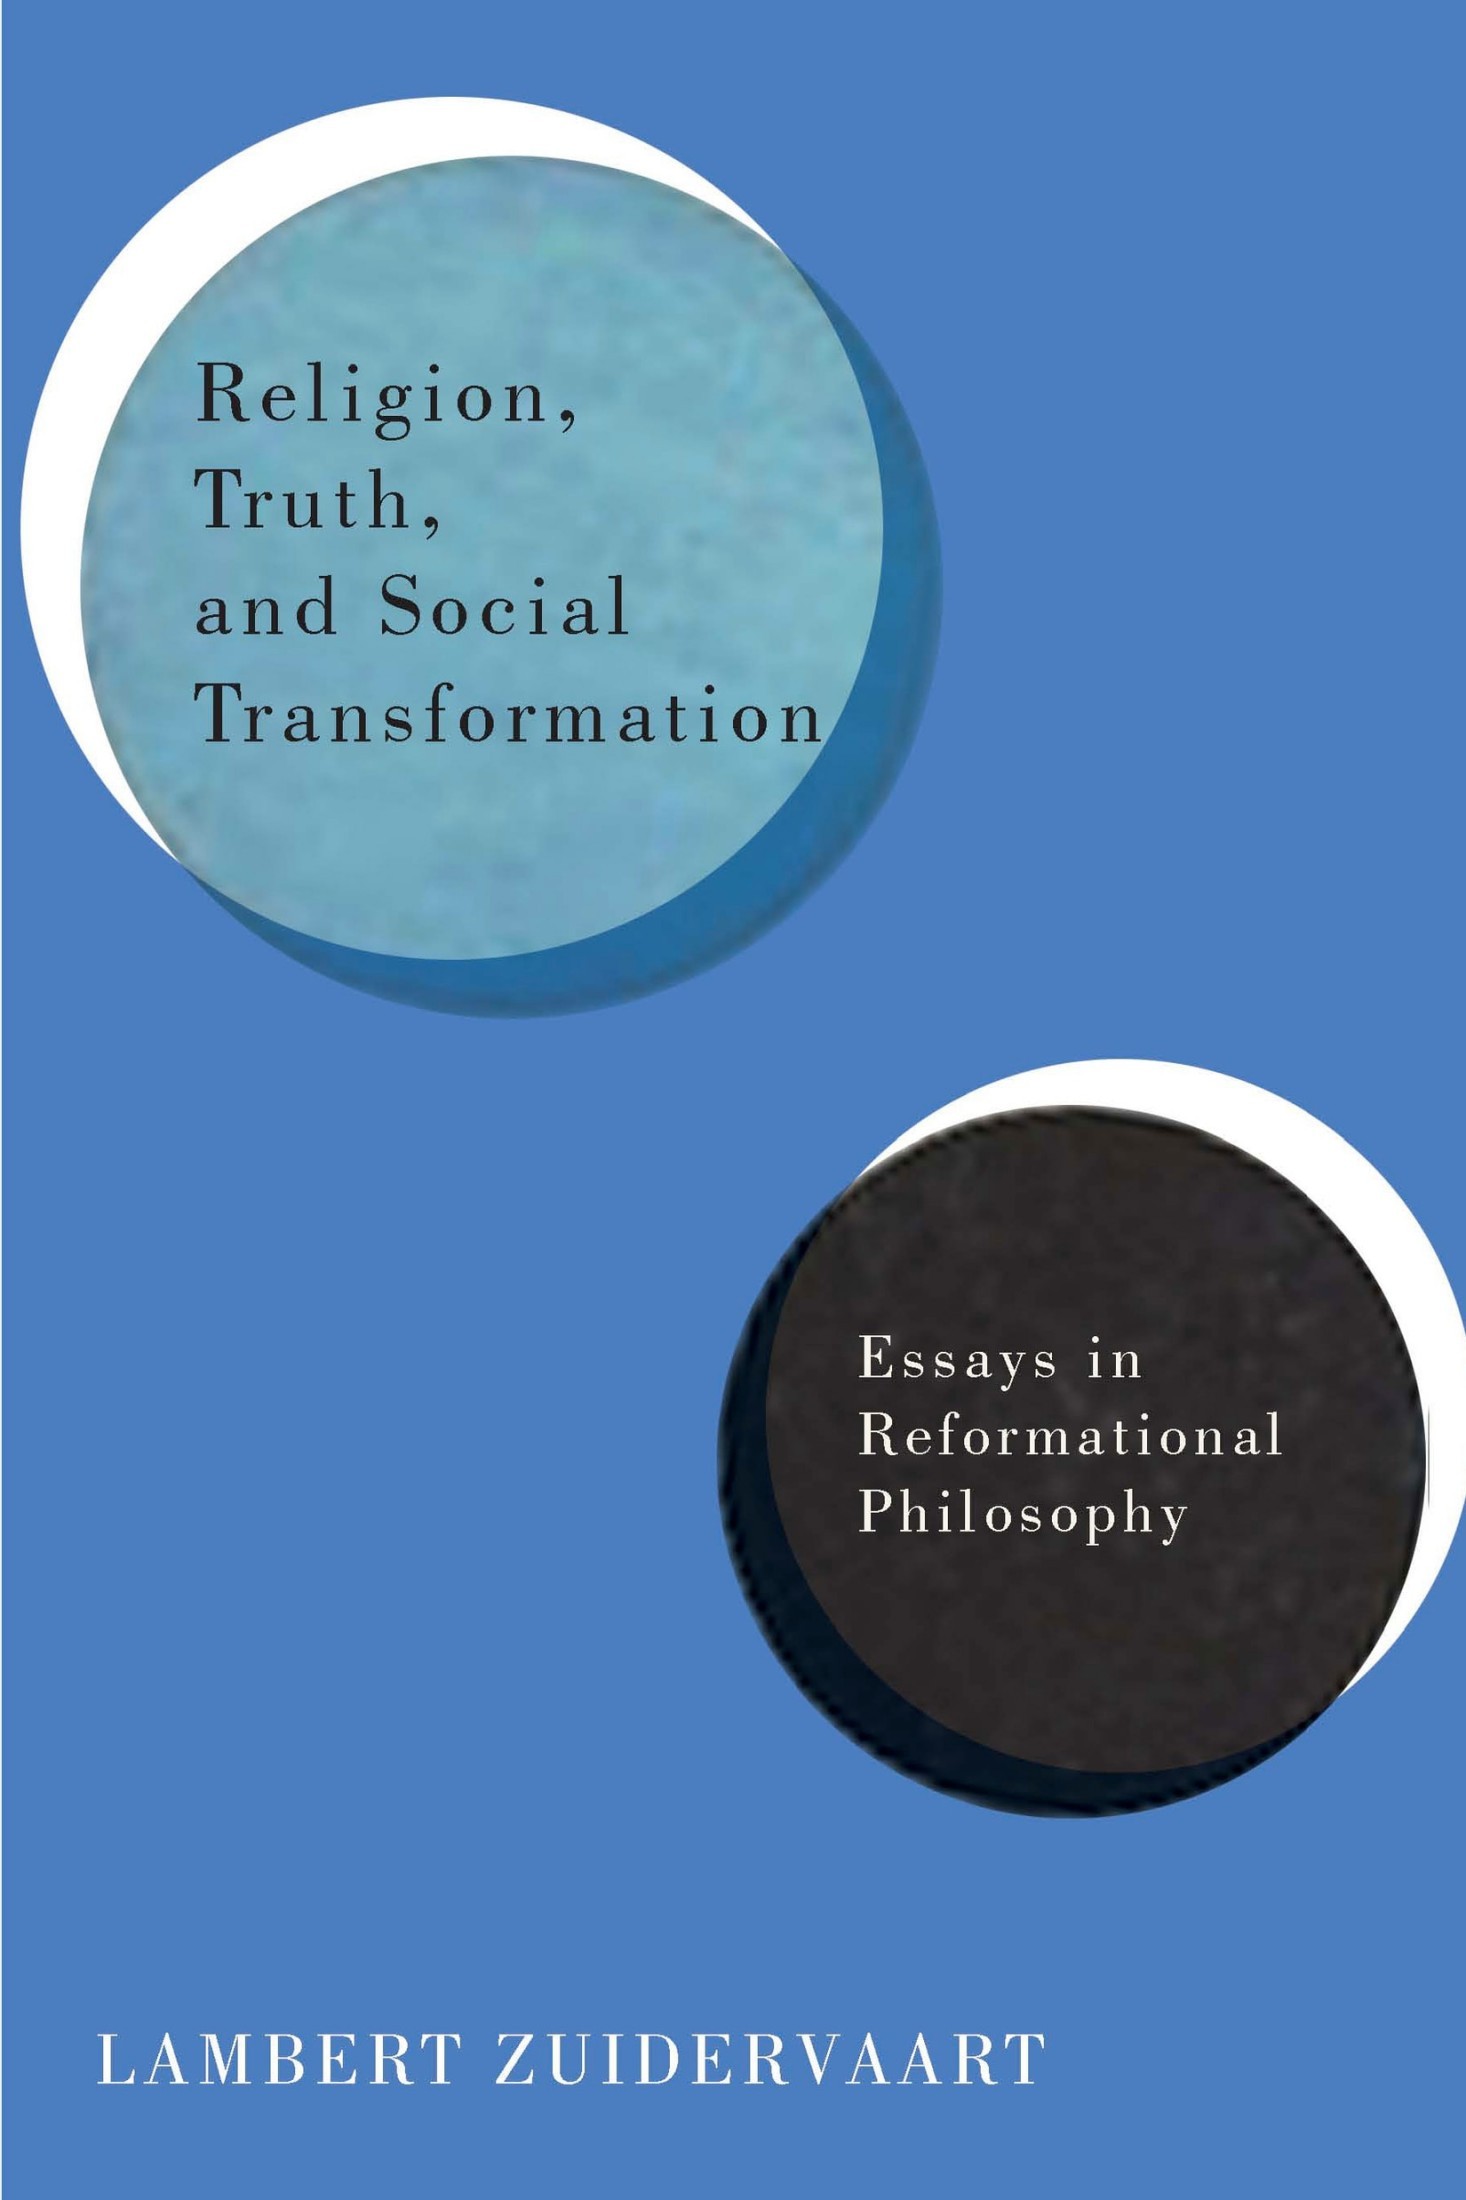 Religion, Truth, and Social Transformation: Essays in Reformational Philosophy